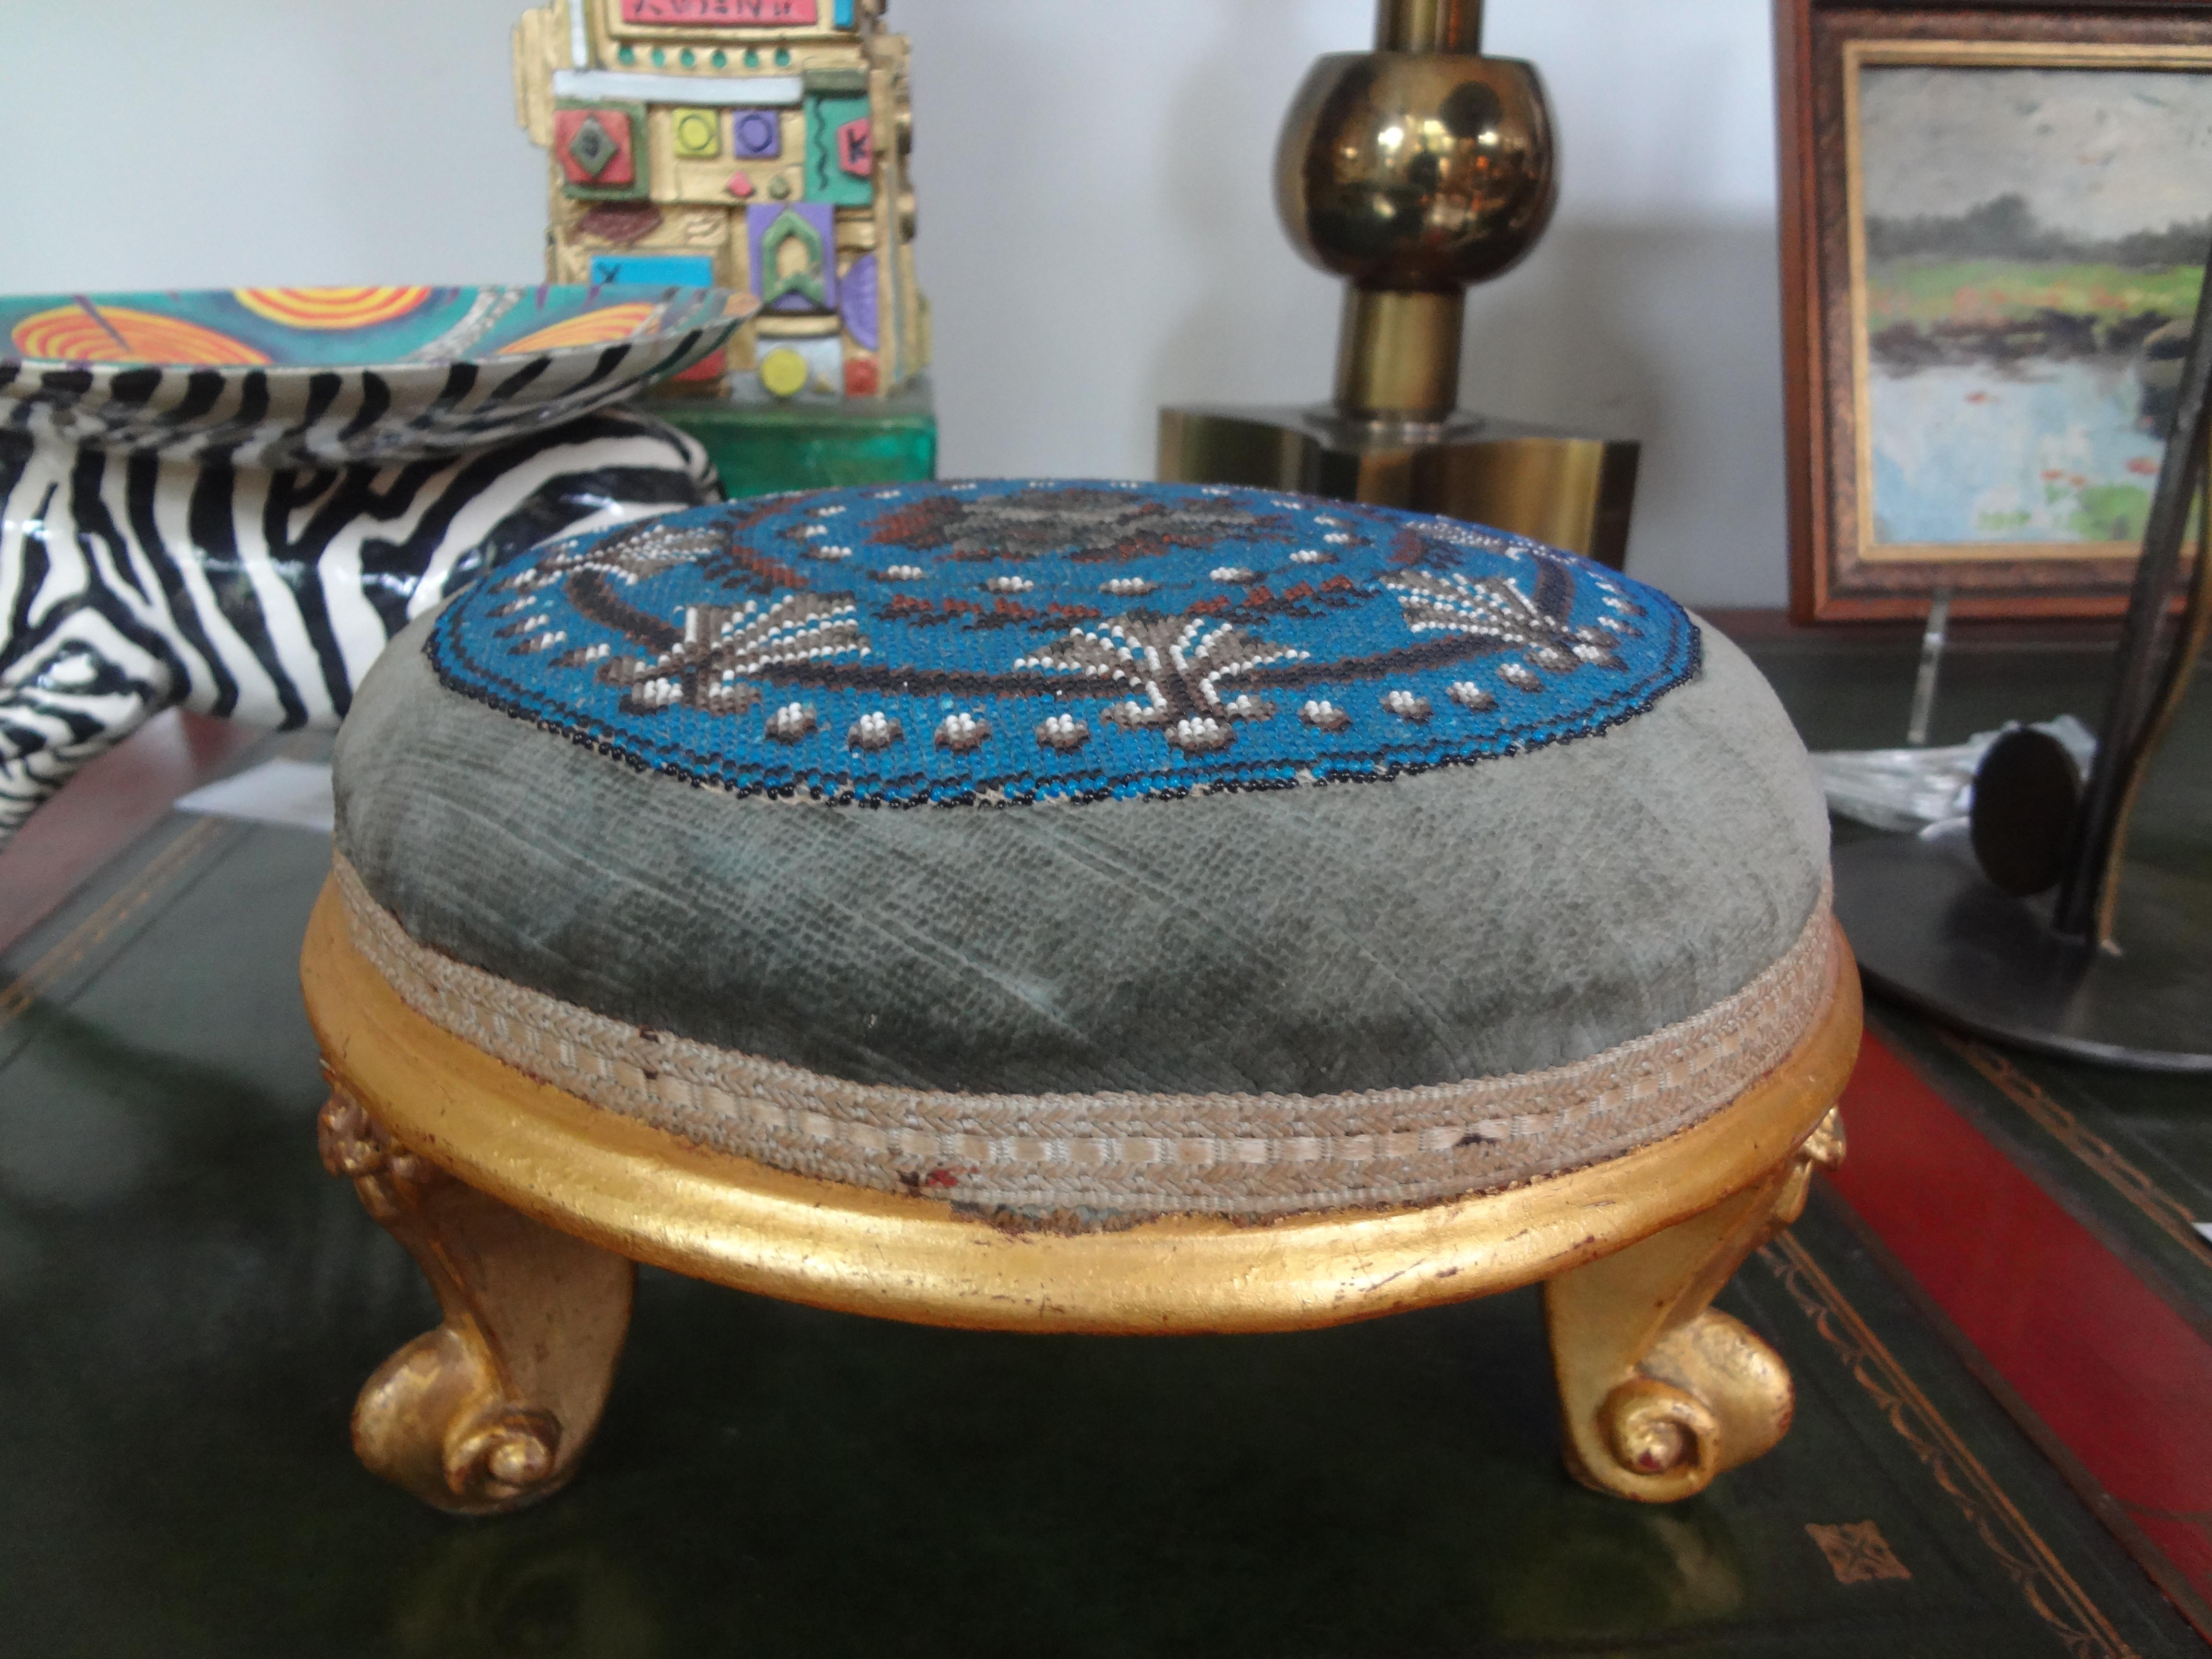 Continental Louis XV Style Beaded giltwood footstool.
Lovely Continental Louis XV style hand beaded gilt wood footstool or tuffet. This beautiful gilt footstool is in great condition and would work perfect as a display stand for a doll or precious